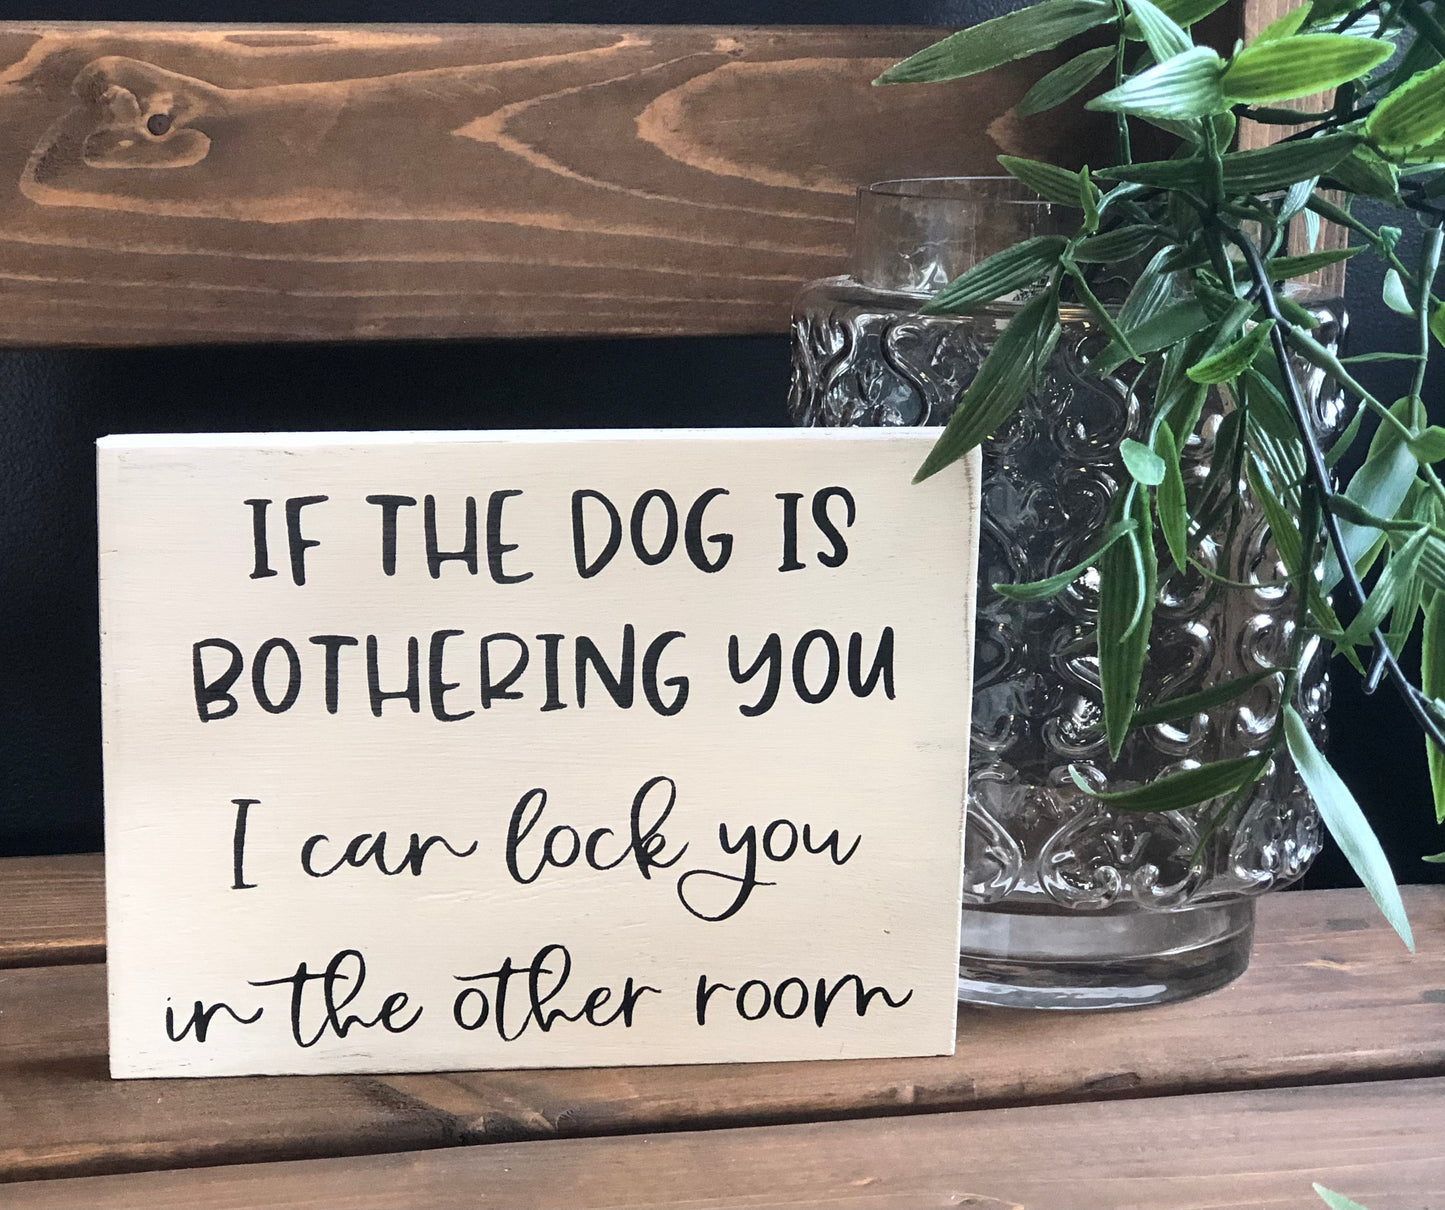 Dog is Bothering You - Funny Rustic Wood Sign